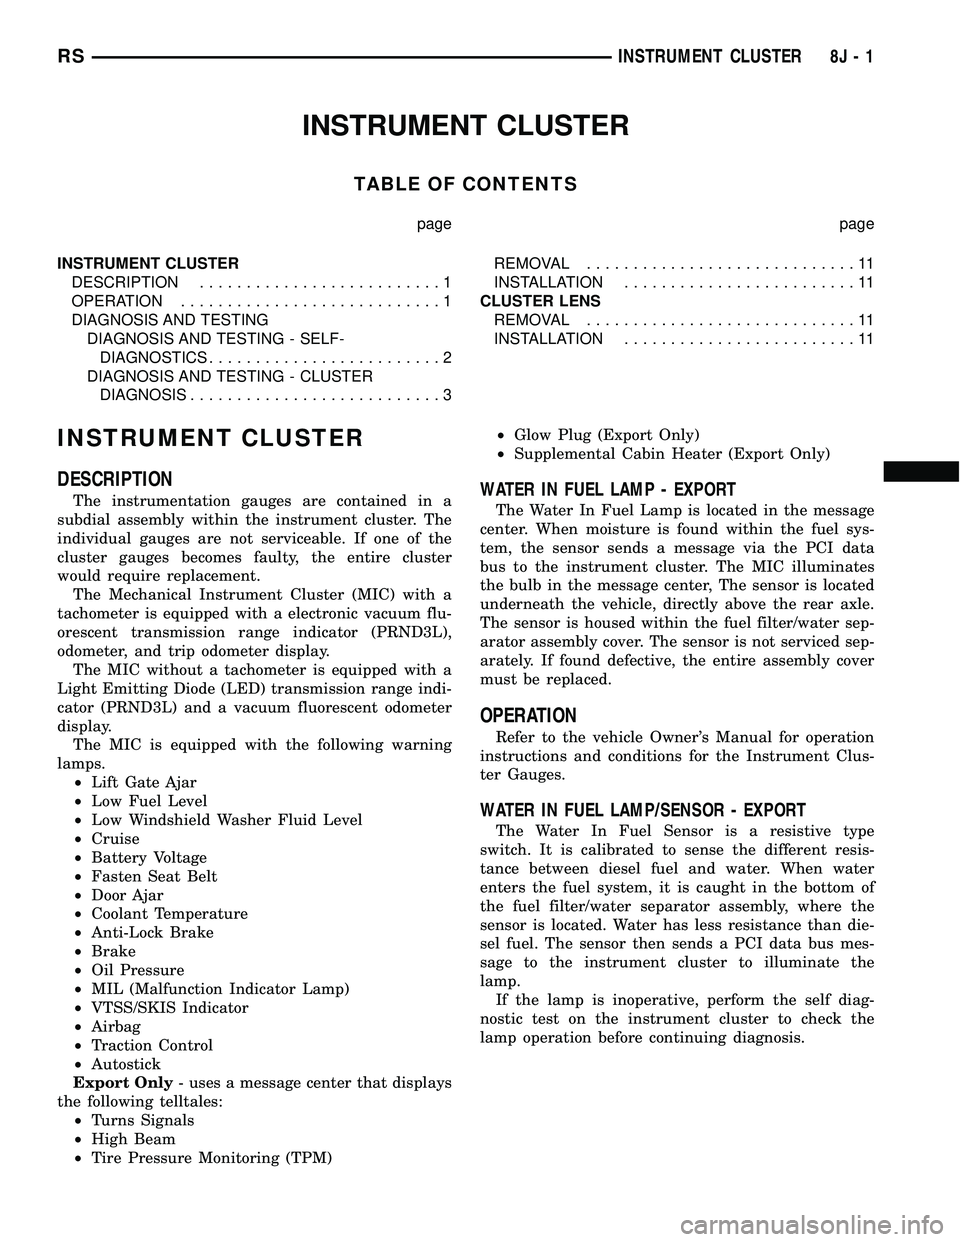 CHRYSLER VOYAGER 2005 Workshop Manual INSTRUMENT CLUSTER
TABLE OF CONTENTS
page page
INSTRUMENT CLUSTER
DESCRIPTION..........................1
OPERATION............................1
DIAGNOSIS AND TESTING
DIAGNOSIS AND TESTING - SELF-
DIAG